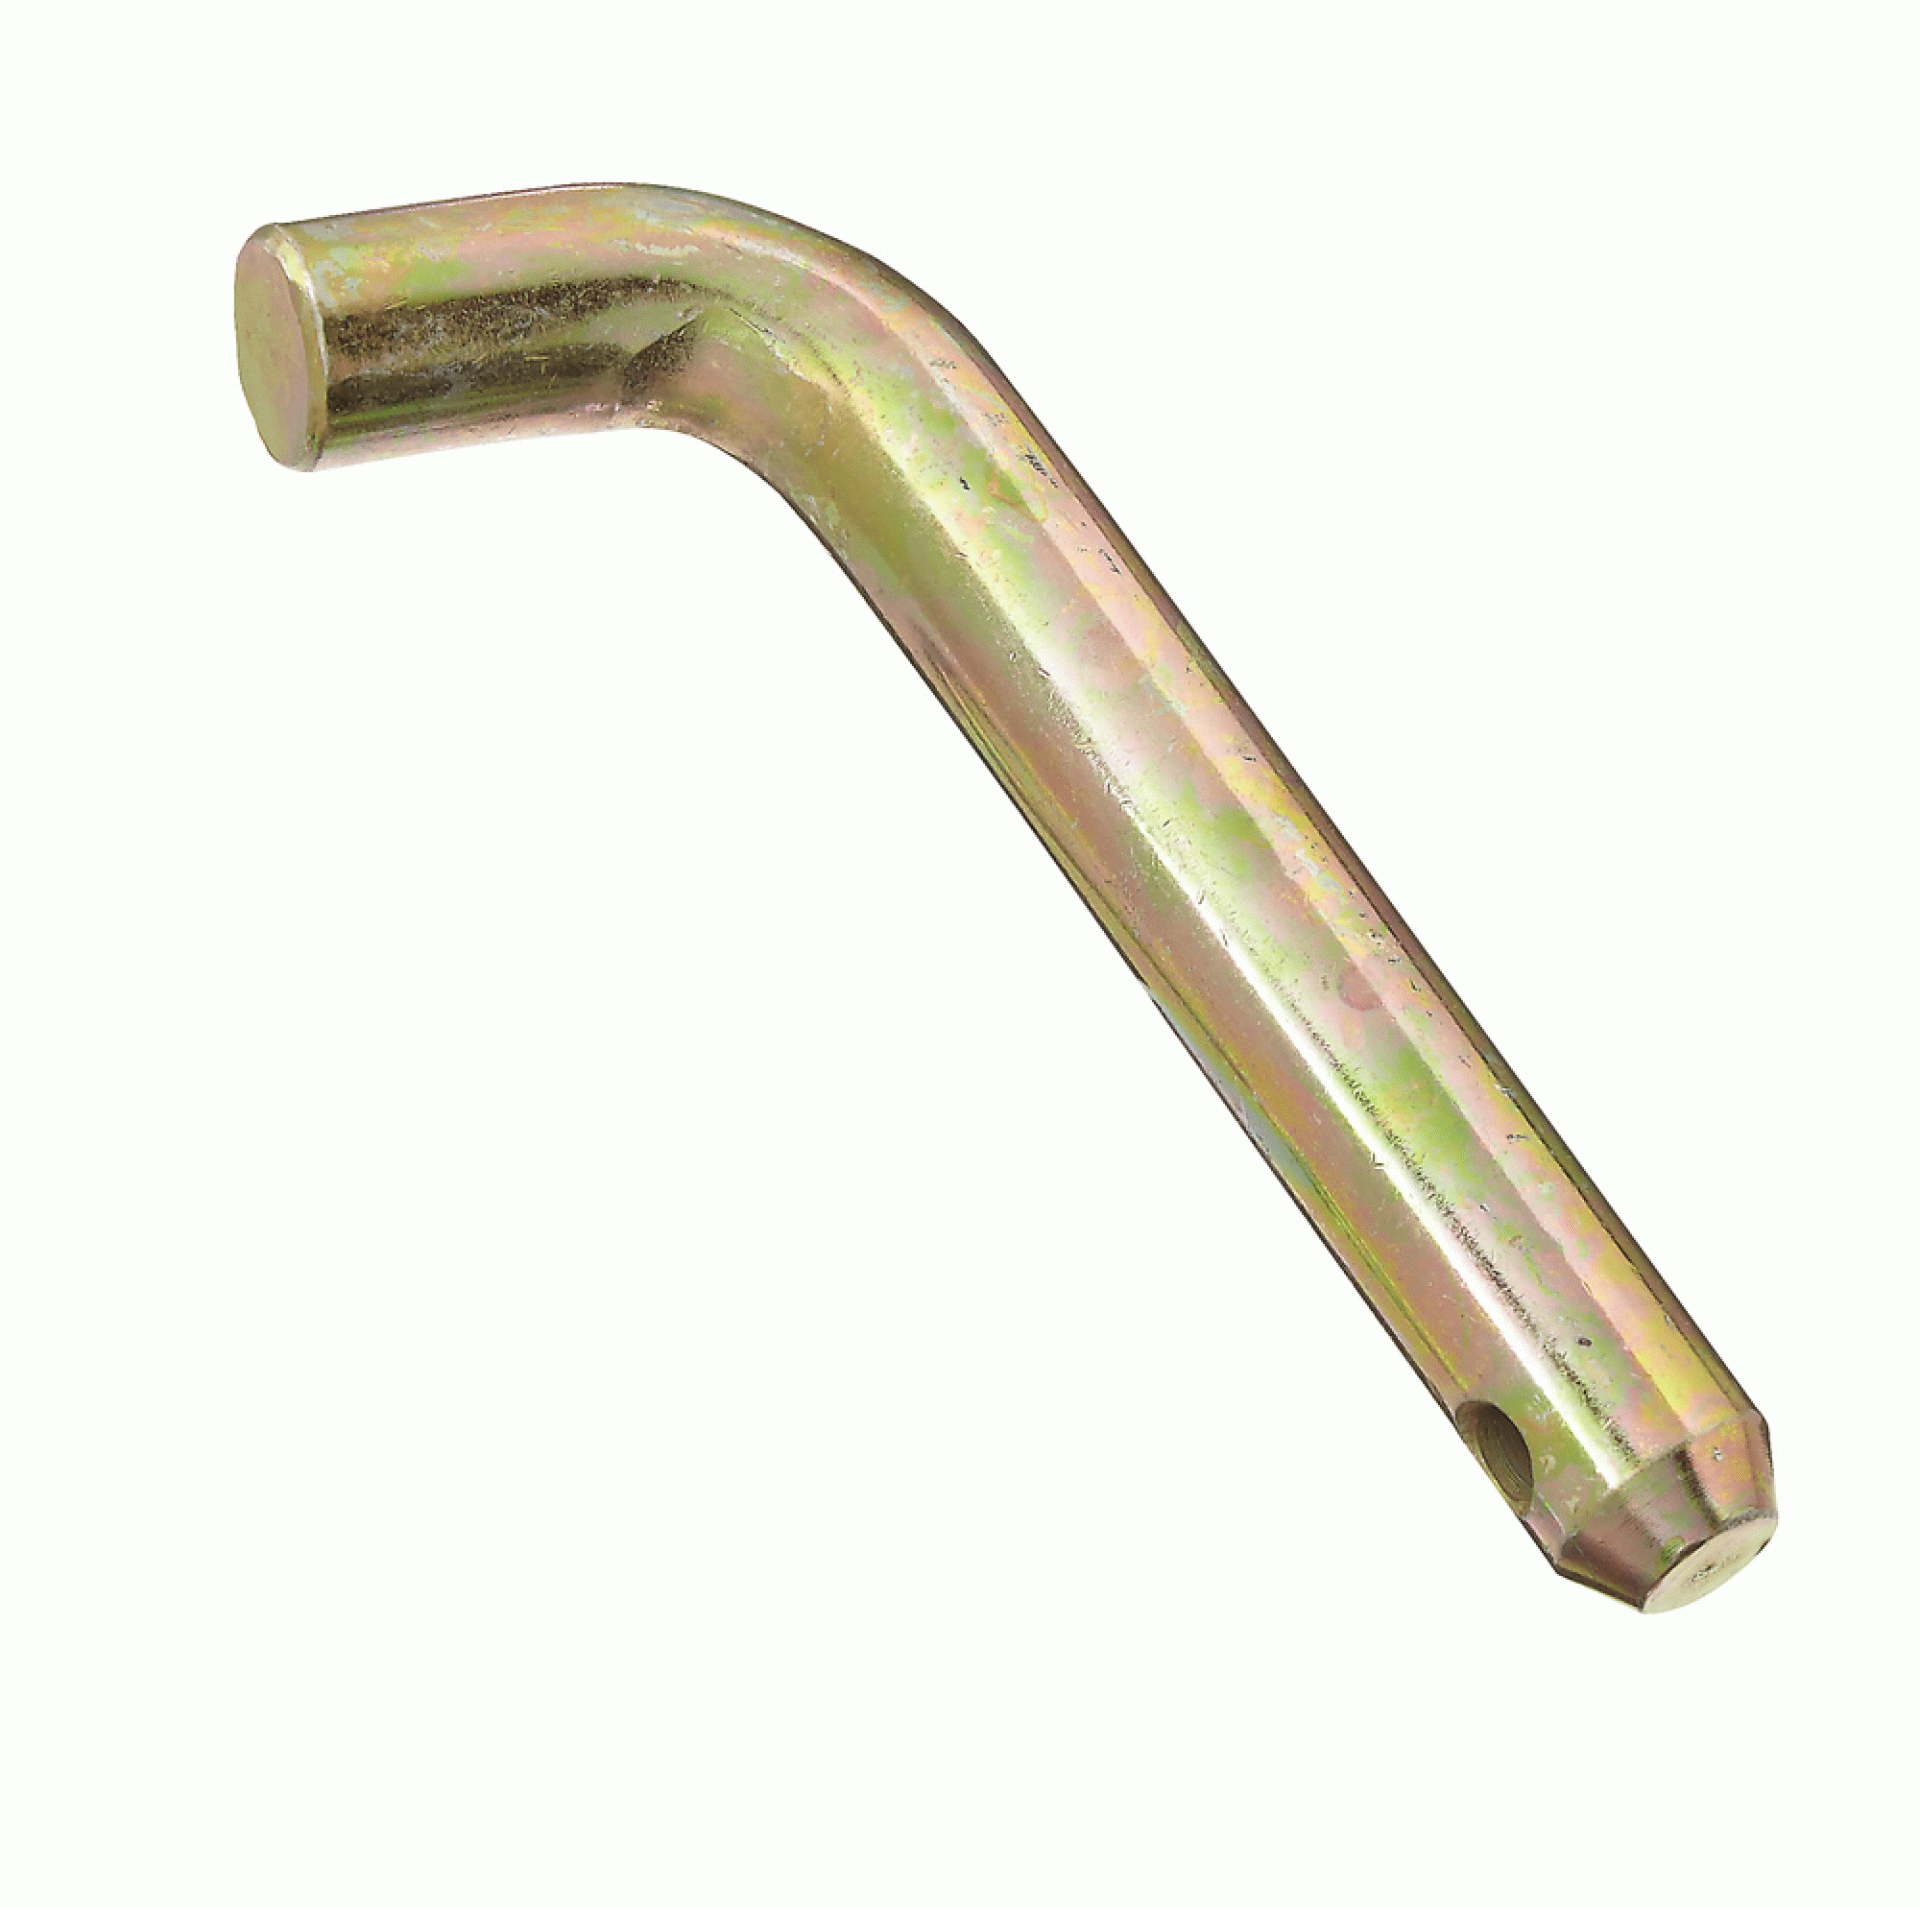 RV DESIGNER COLLECTION | H412 | Hitch Pin 5/8"